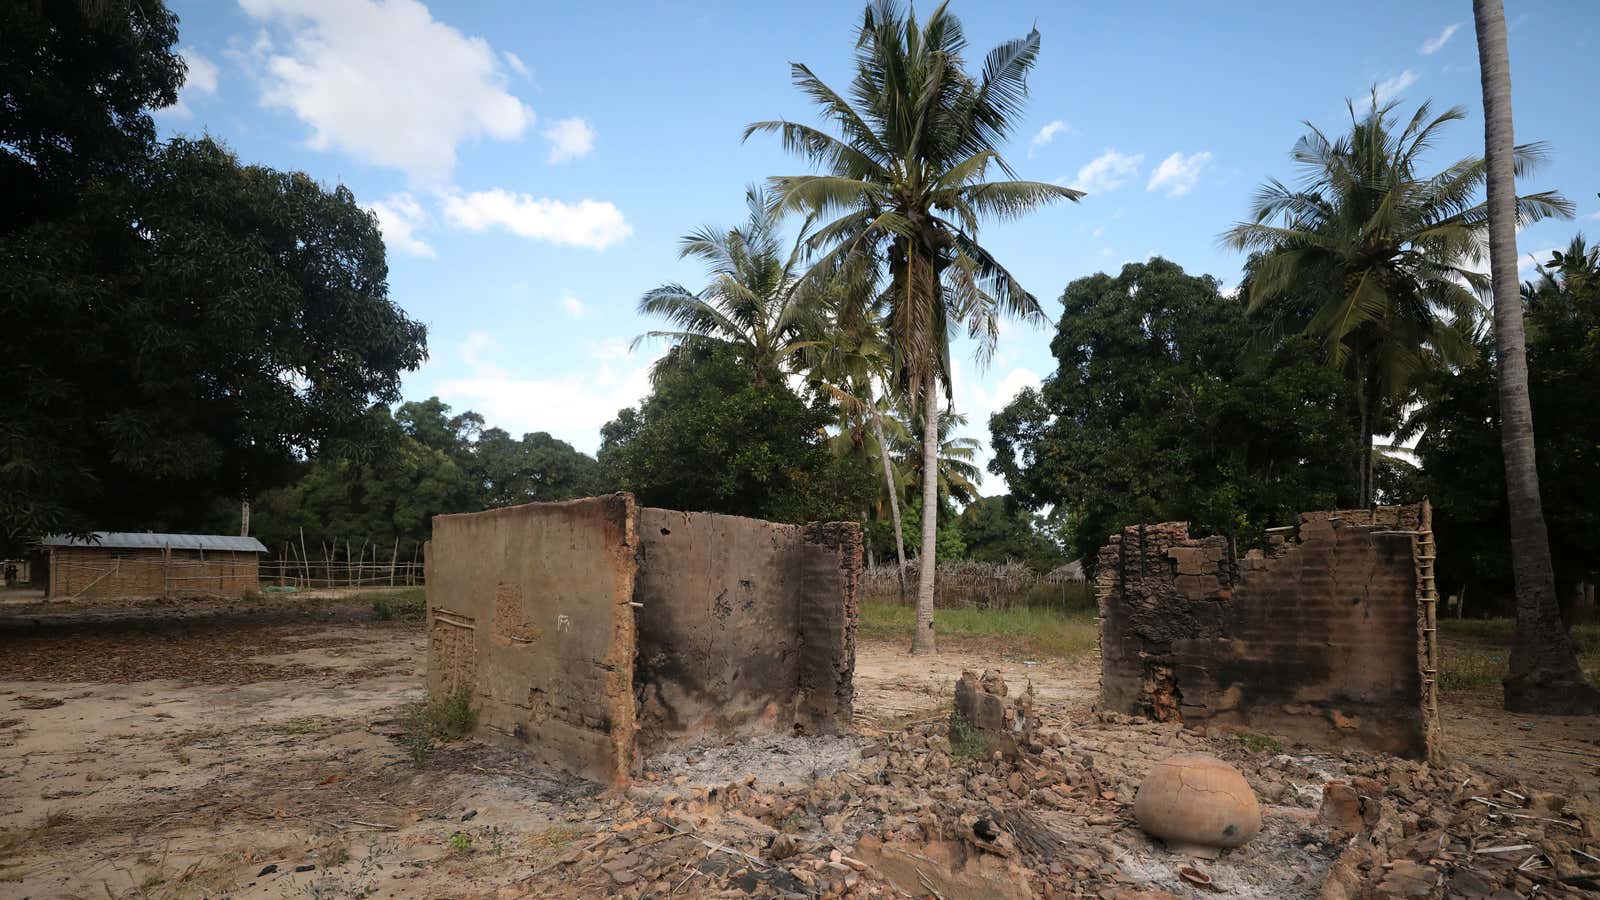 Burnt-out huts are seen at the scene of an armed attack by Islamist terrorists in Chitolo village, Mozambique, July 10, 2018.